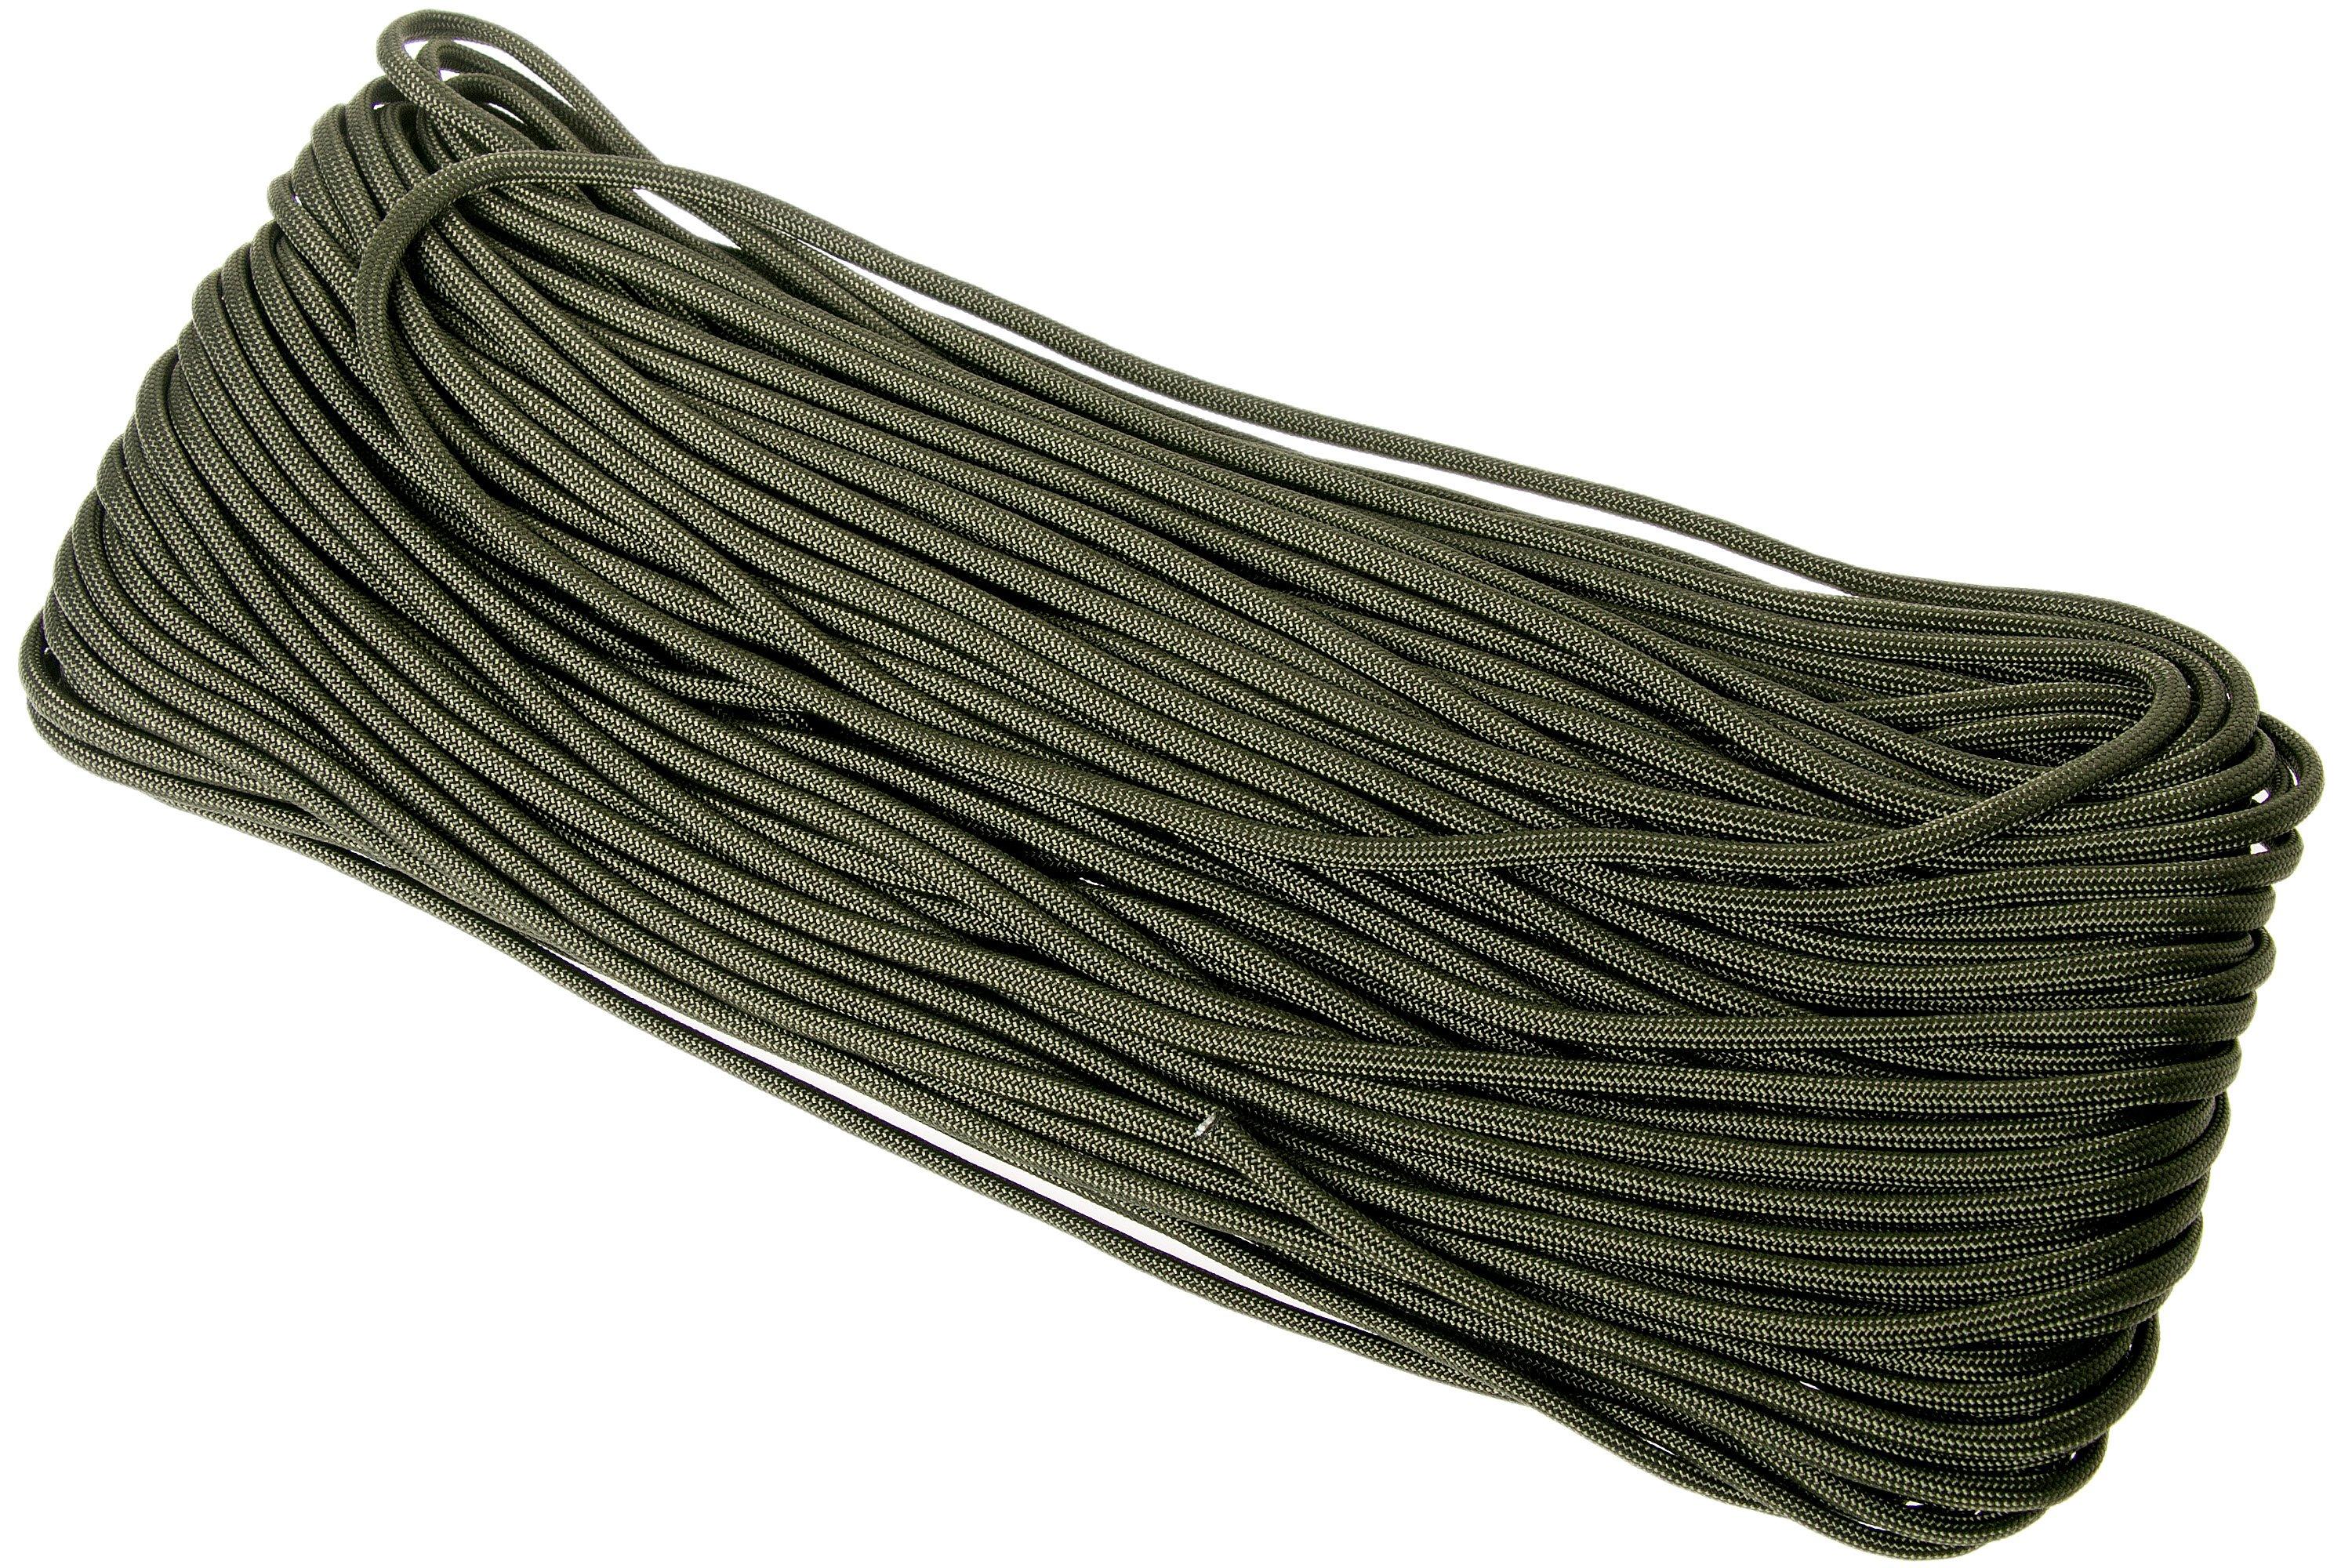 Knivesandtools 550 paracord type III, colour: olive drab, 100 ft (30.48 m)